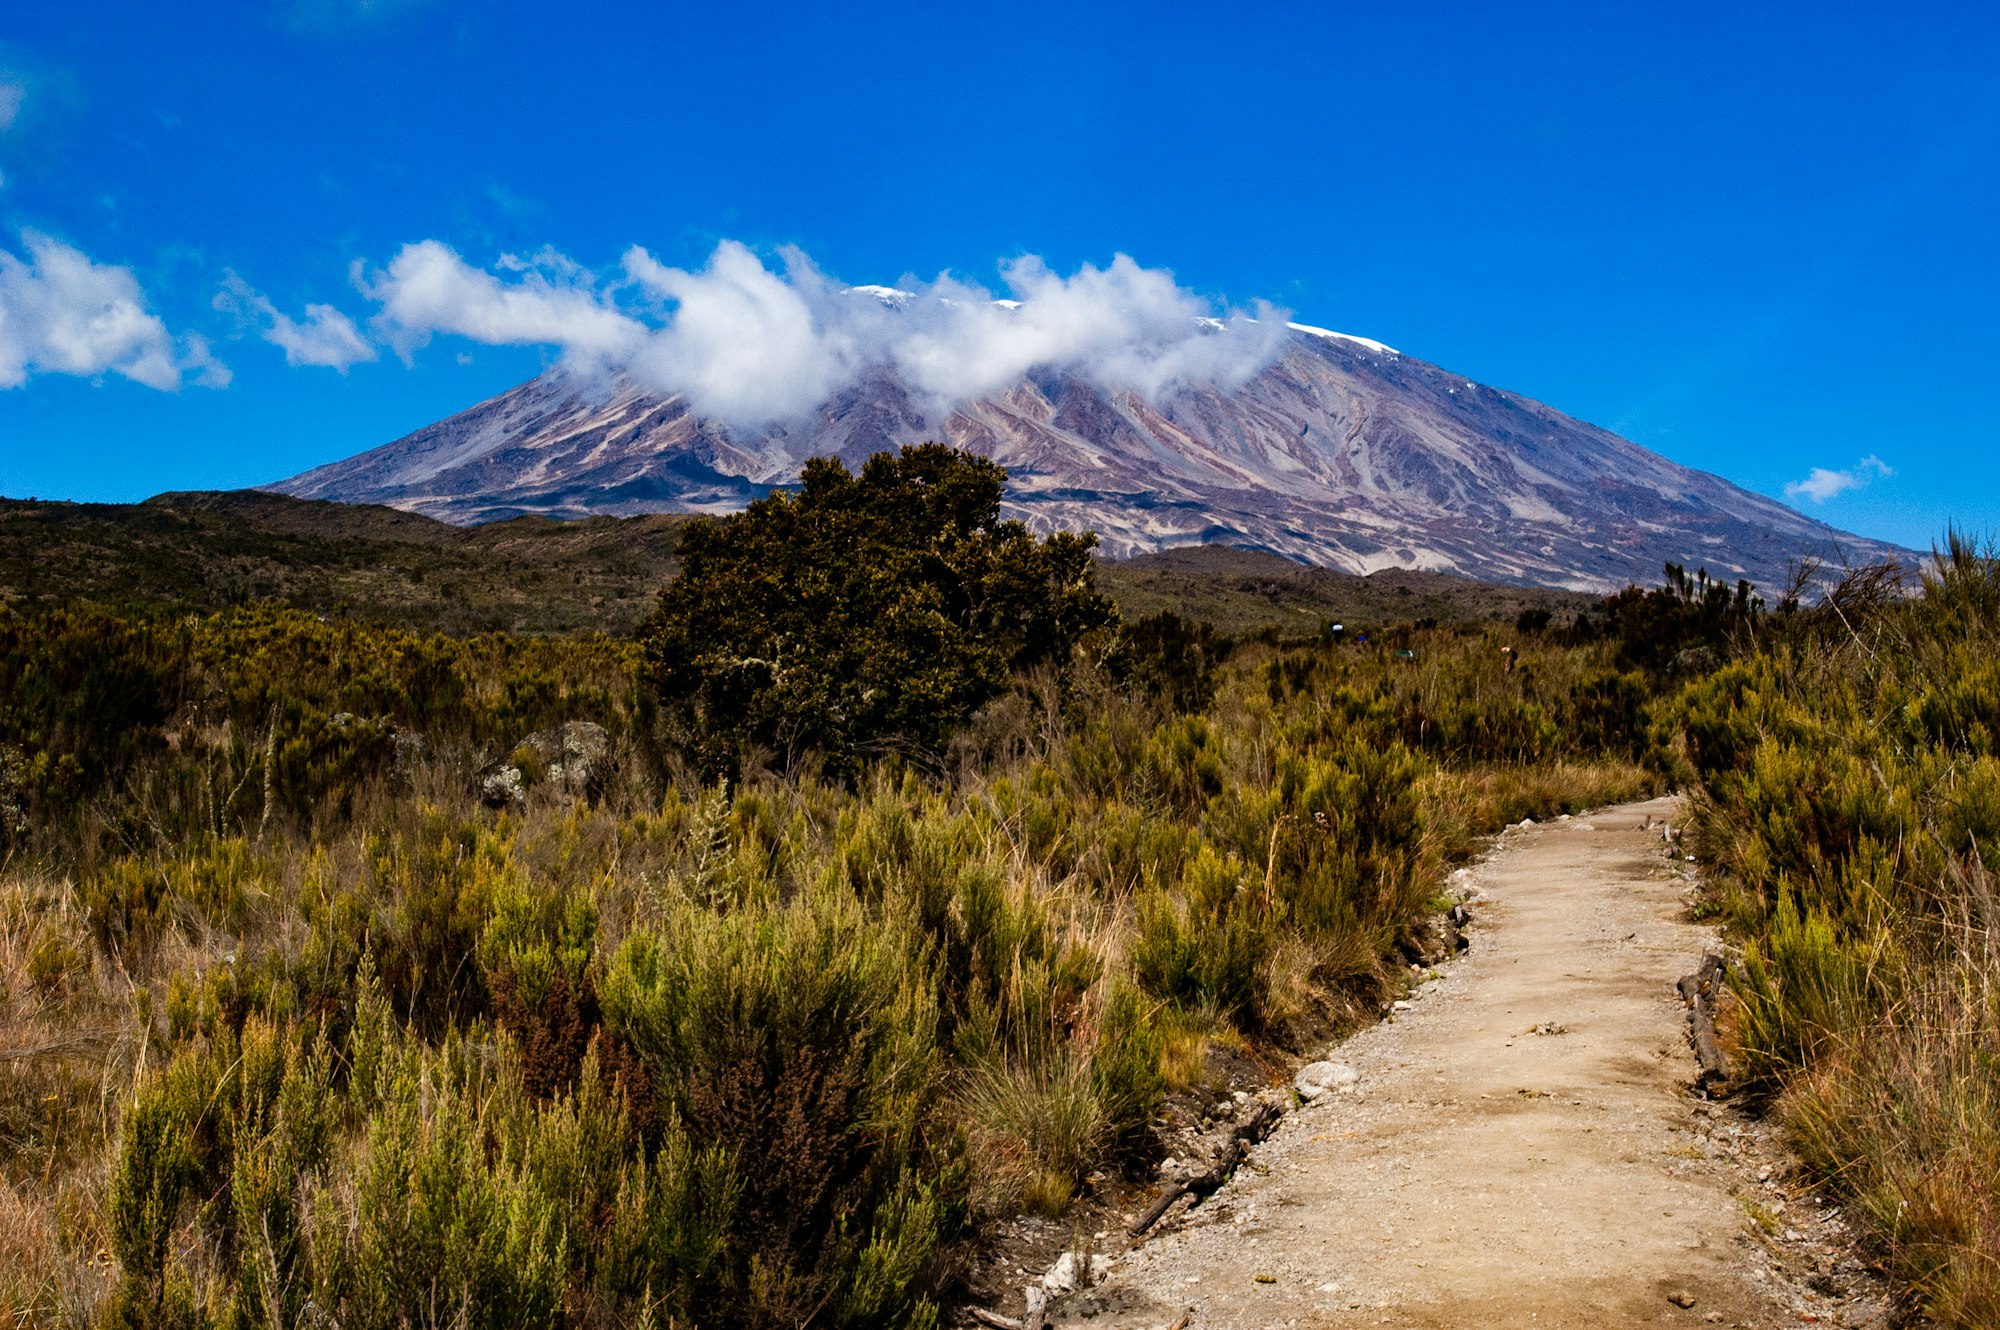 Path between shrub and bushes looking towards Kilimanjaro. Part of the Rongai route